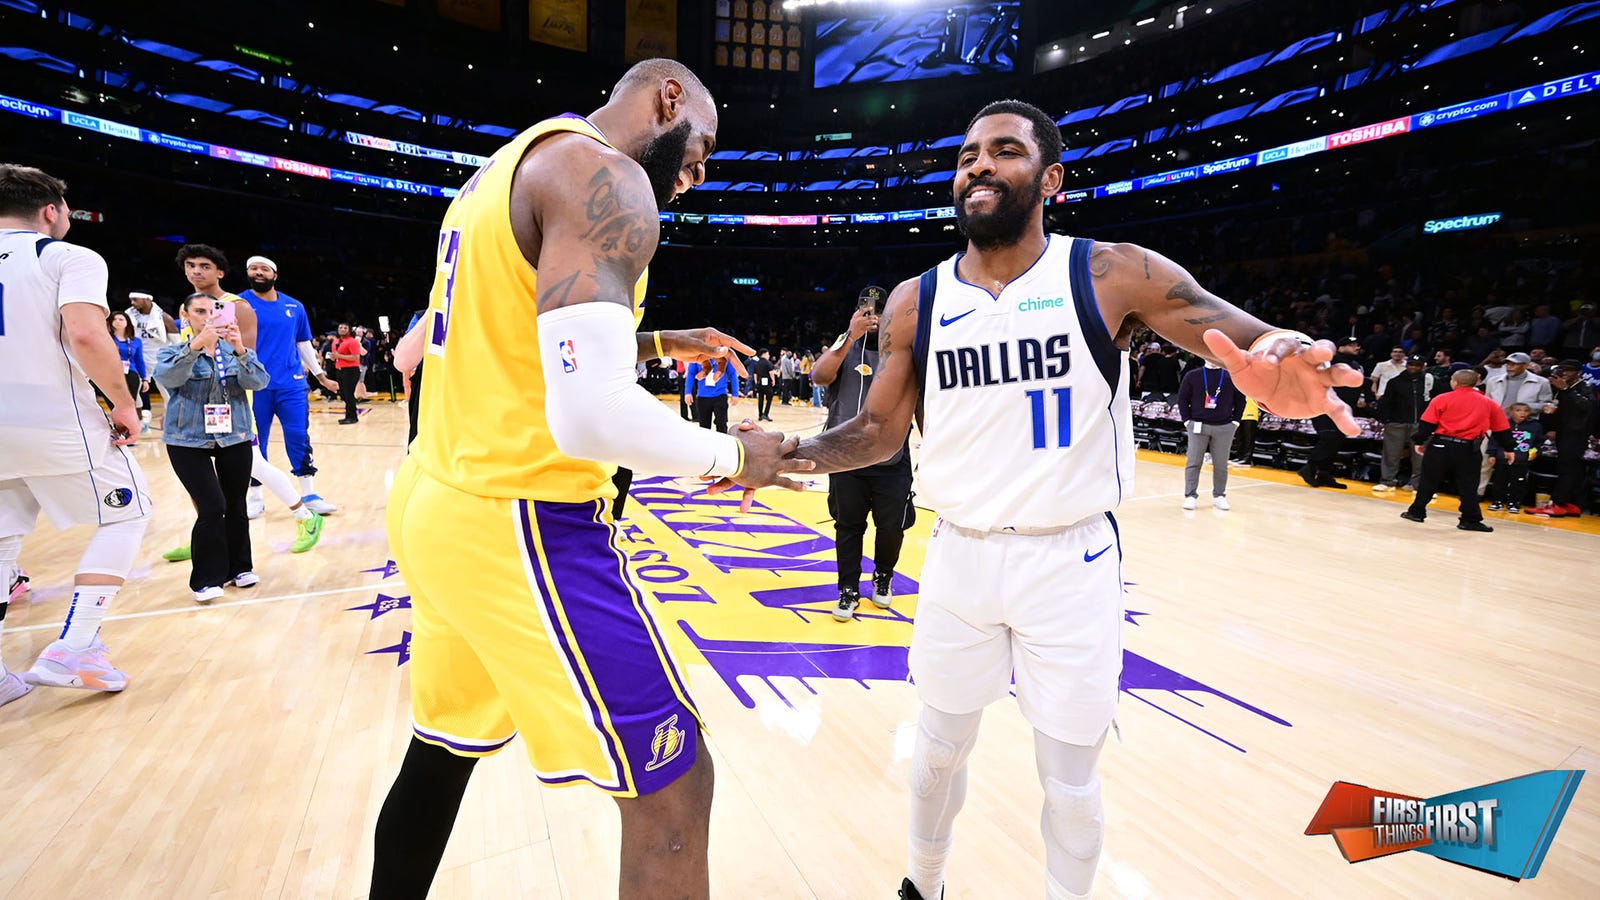 LeBron crowns Kyrie Irving as the 'most gifted' NBA player ever